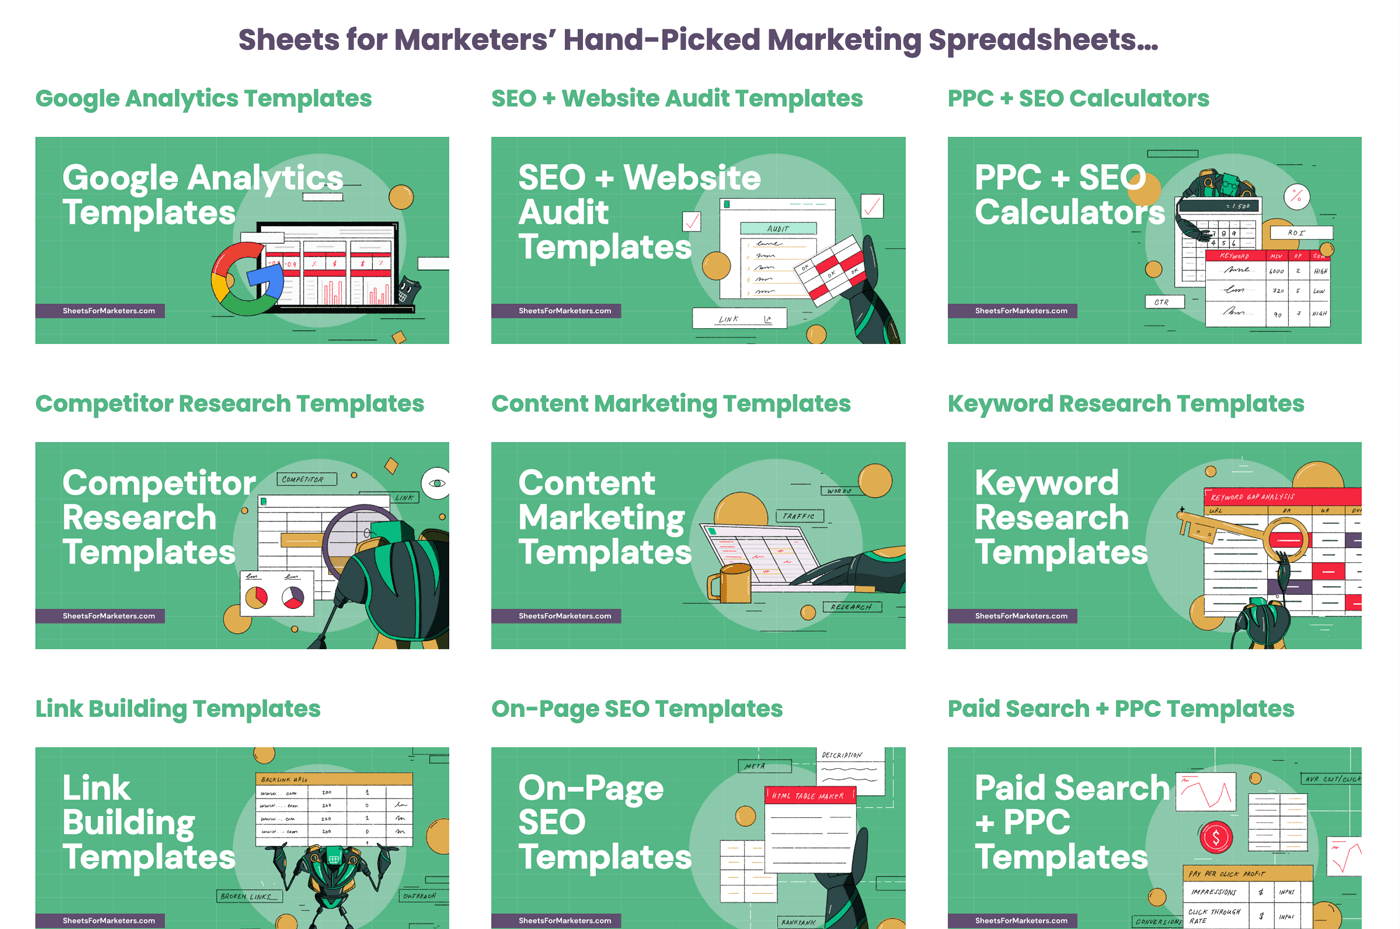 Sheets for Marketers - Templates